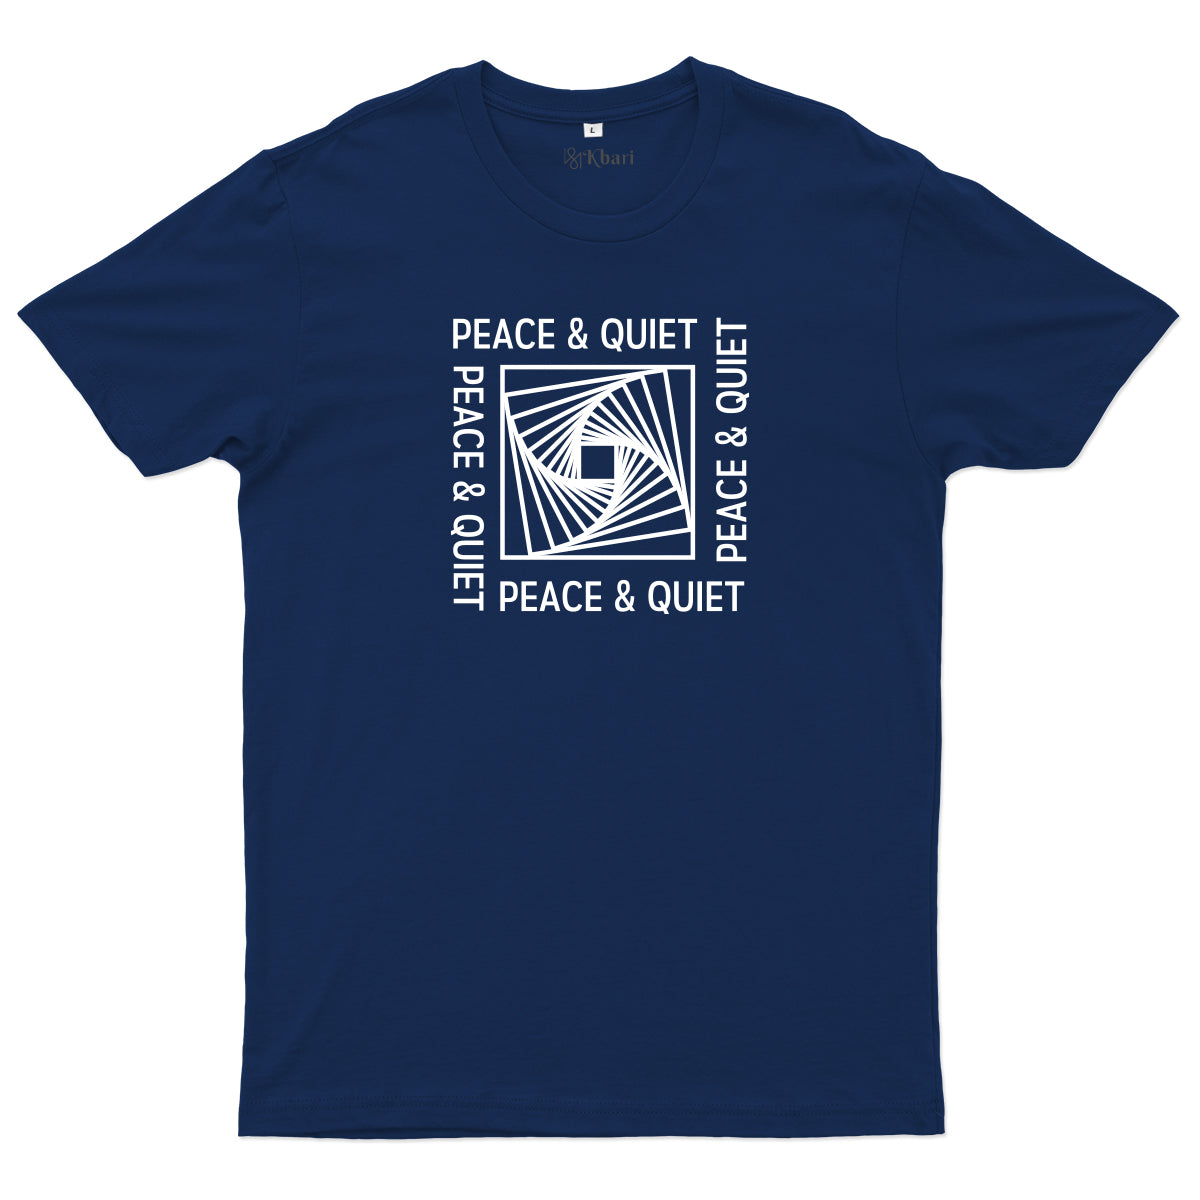 Peace & Quiet Front Graphic Printed Regular T-Shirt